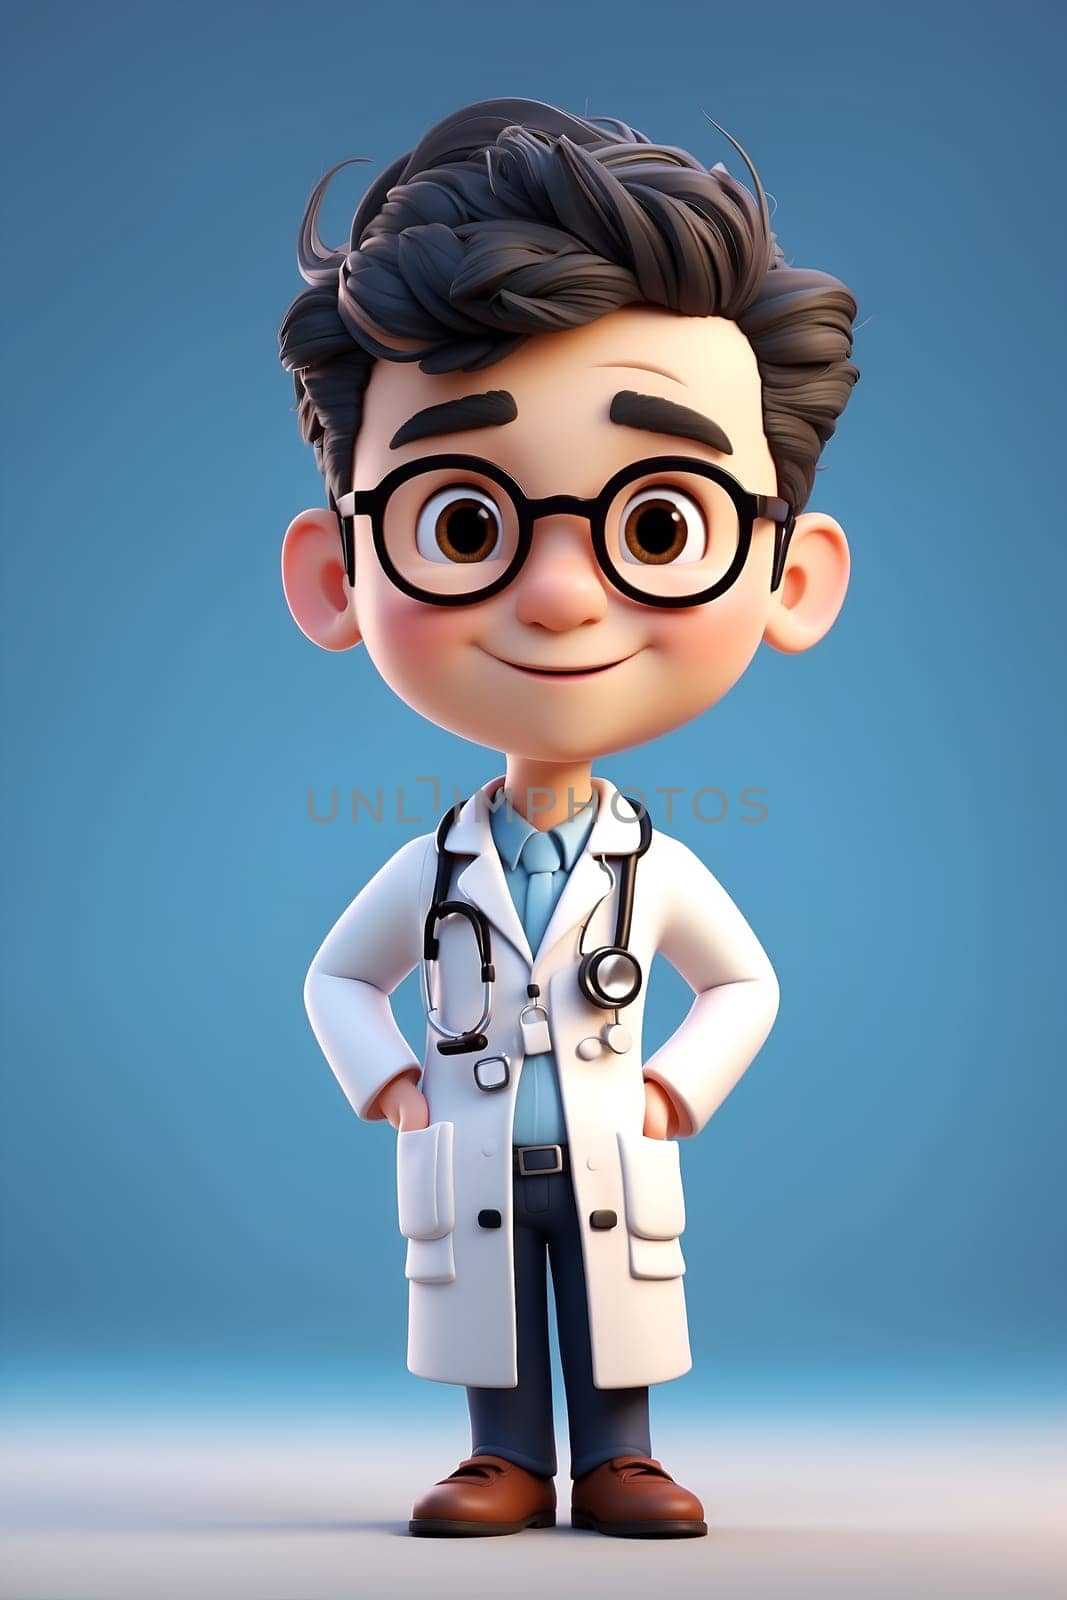 A cartoon character wearing glasses and a stethoscope is shown in this image, providing medical care to patients.